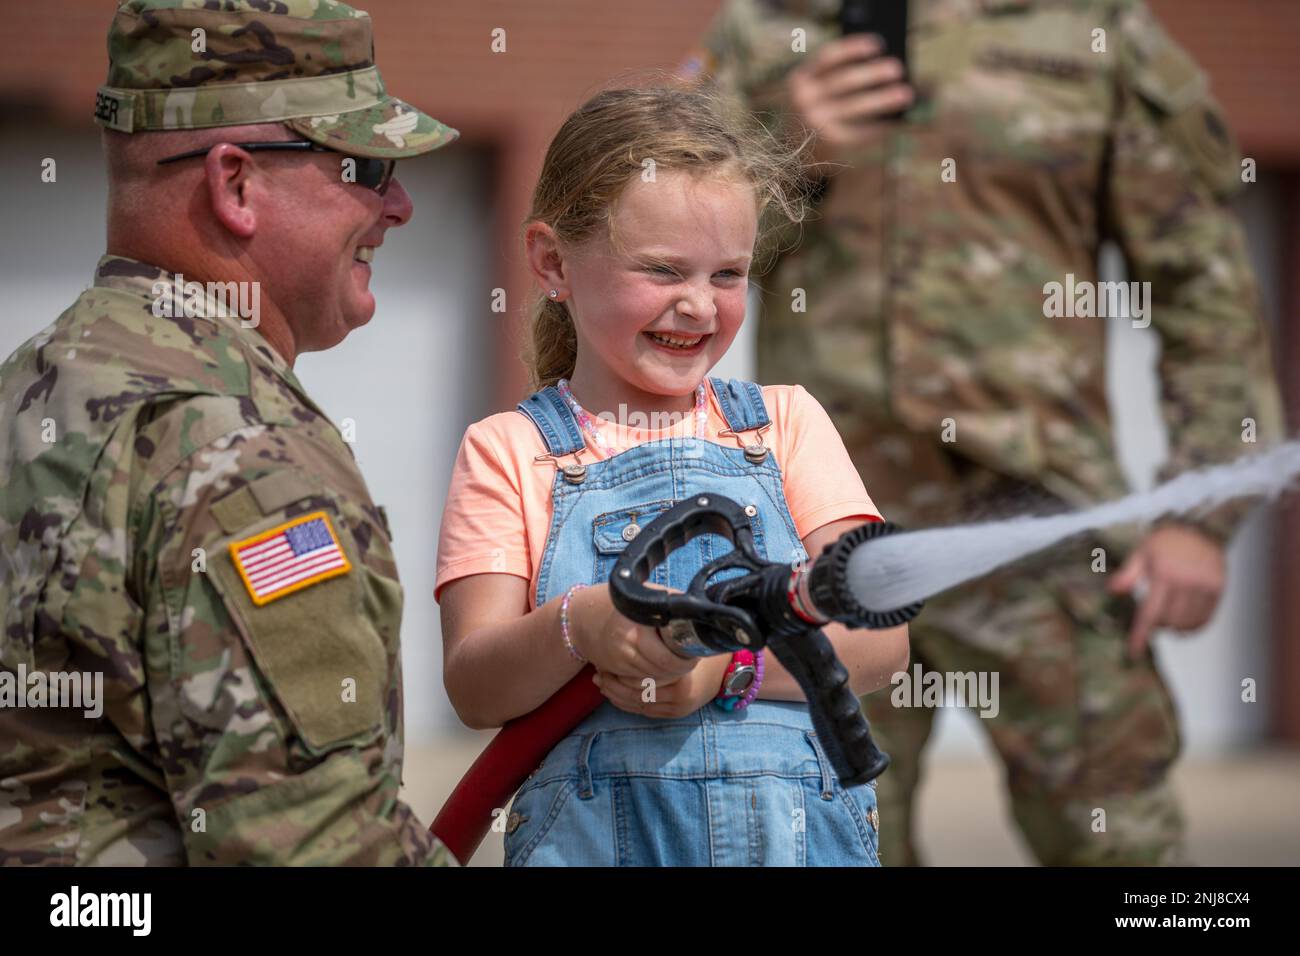 Six-year-old Birdie Amerson sprays a fire hose with the help of Sgt. Steve Krueger, 467th Engineer Battalion, Firefighter Headquarters, during an open house at Fort Des Moines, Iowa, Aug. 6, 2022. The event welcomed more than 70 people to the historic U.S Army Reserve base to see the current training units. Stock Photo